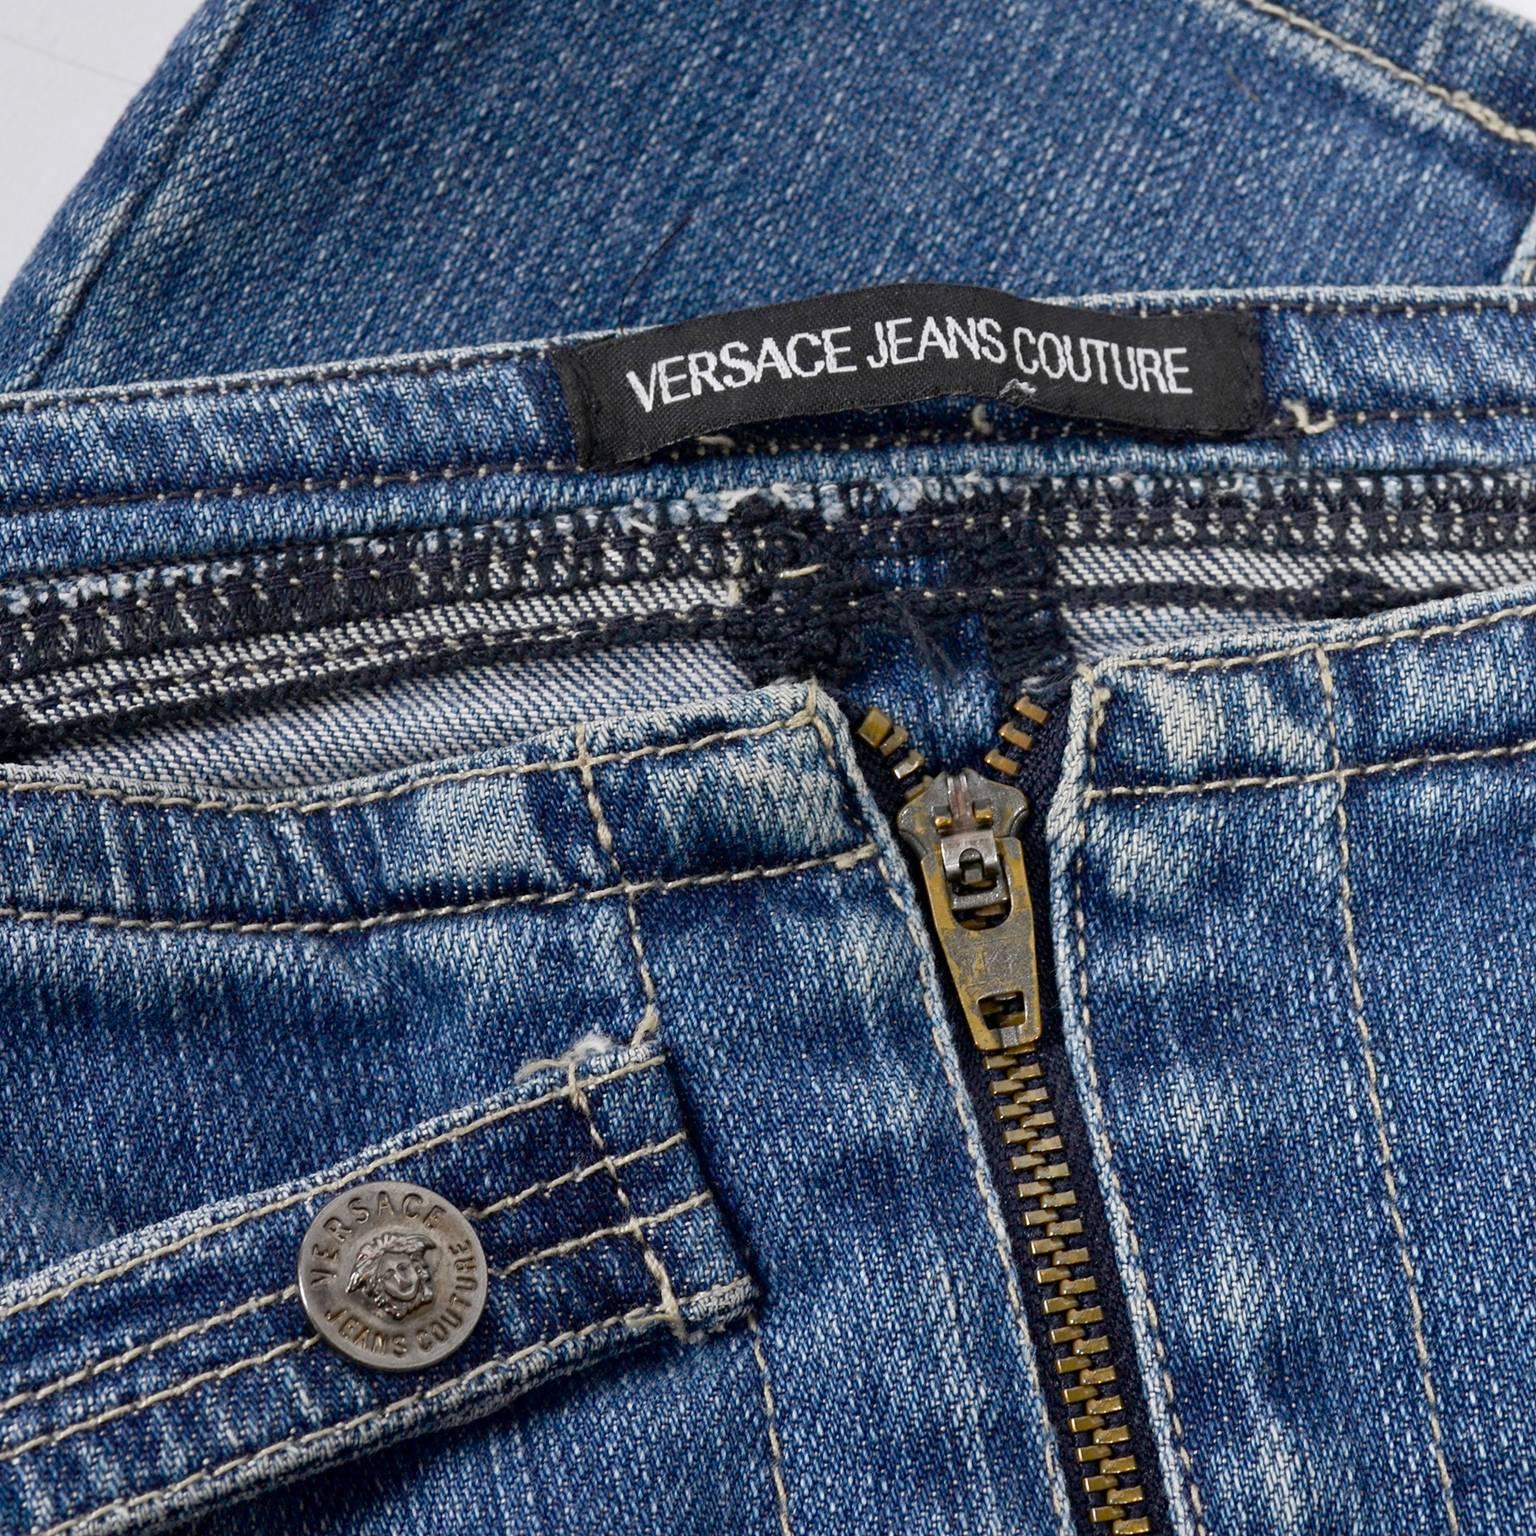 Versace Jeans Couture Denim Blue Skirt W Dangling Metal Charms 1